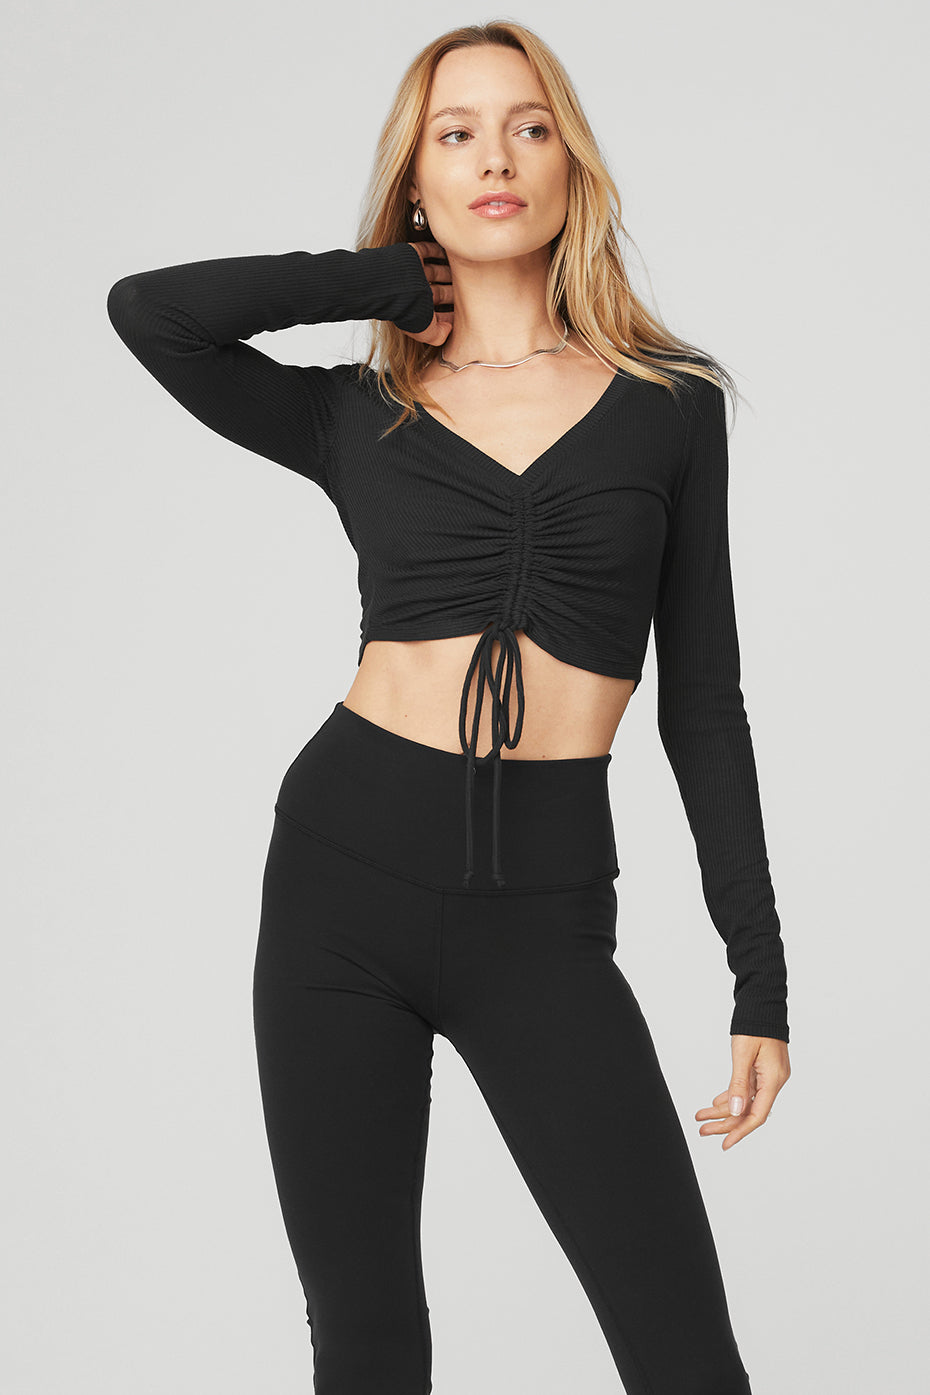 Ribbed-knit crop top in black - Alo Yoga